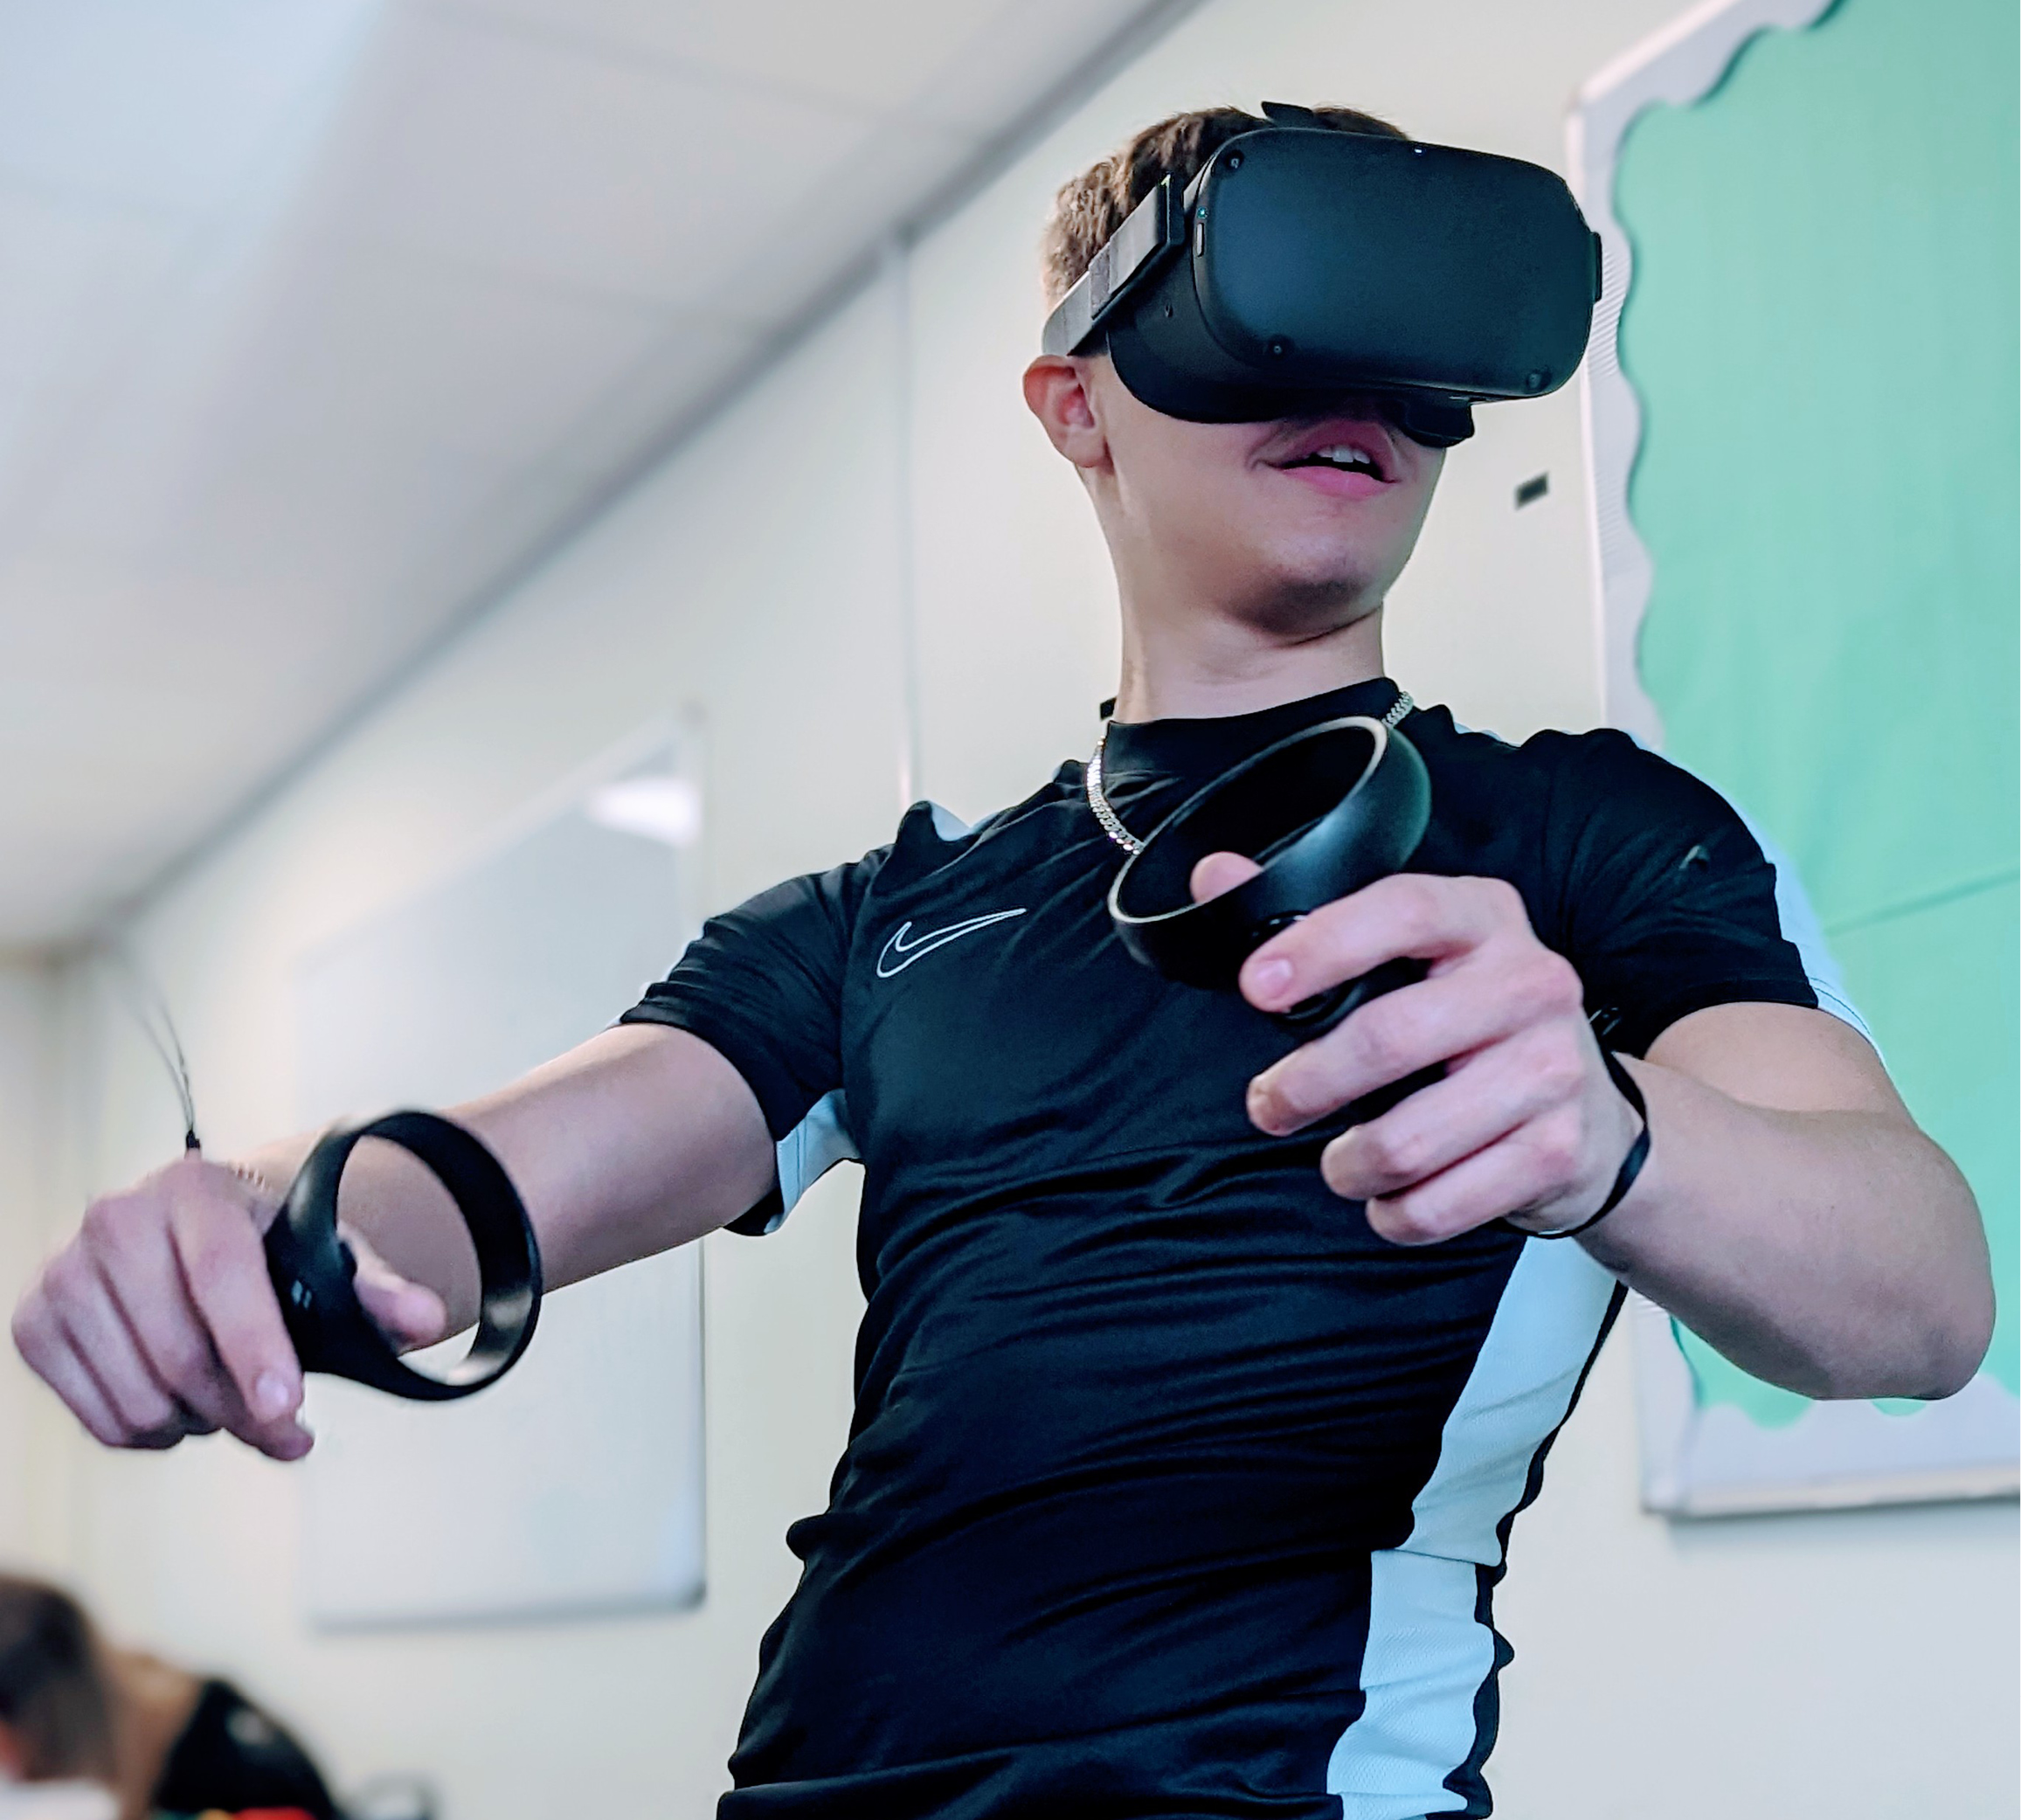 Student with VR headset and hand held controllers